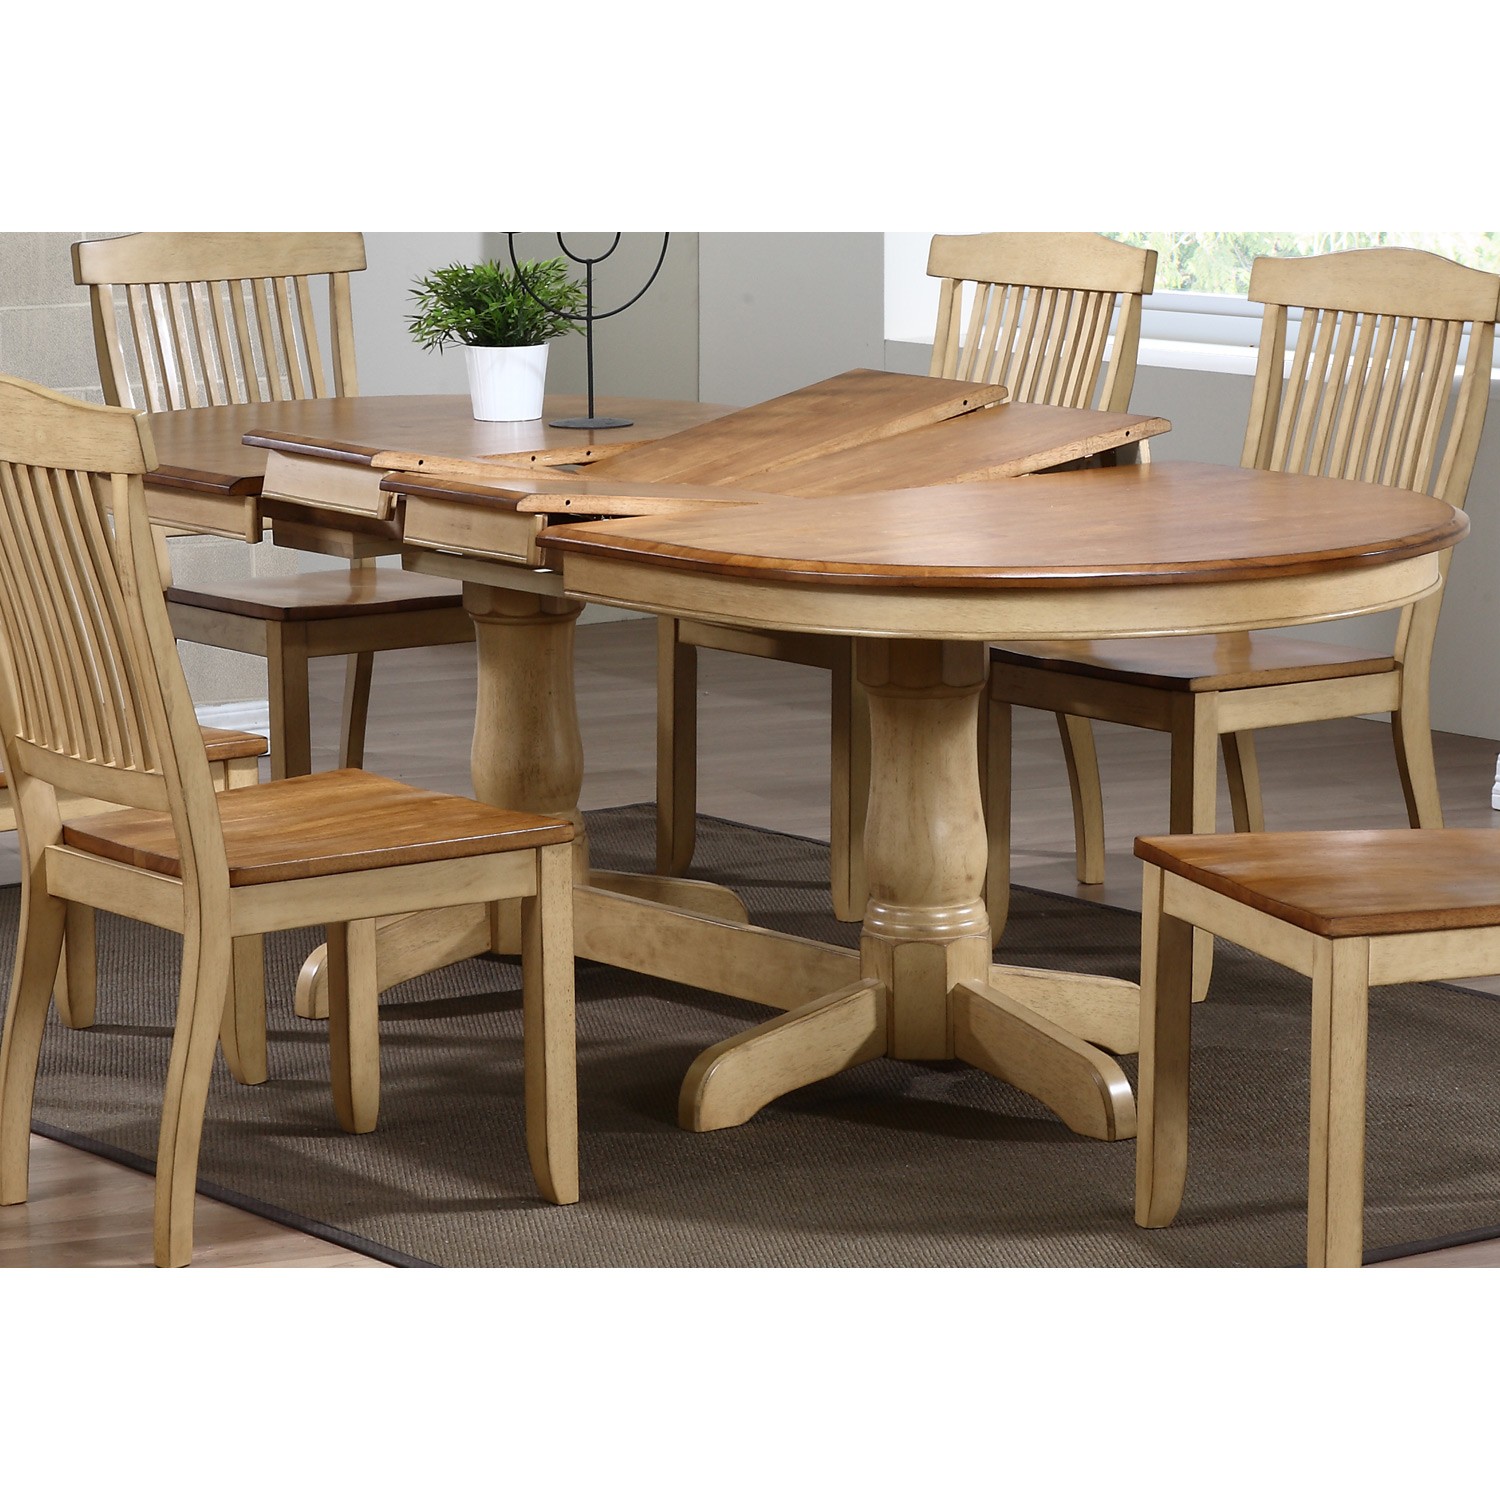 Gatsby oval dining table double butterfly leaf honey